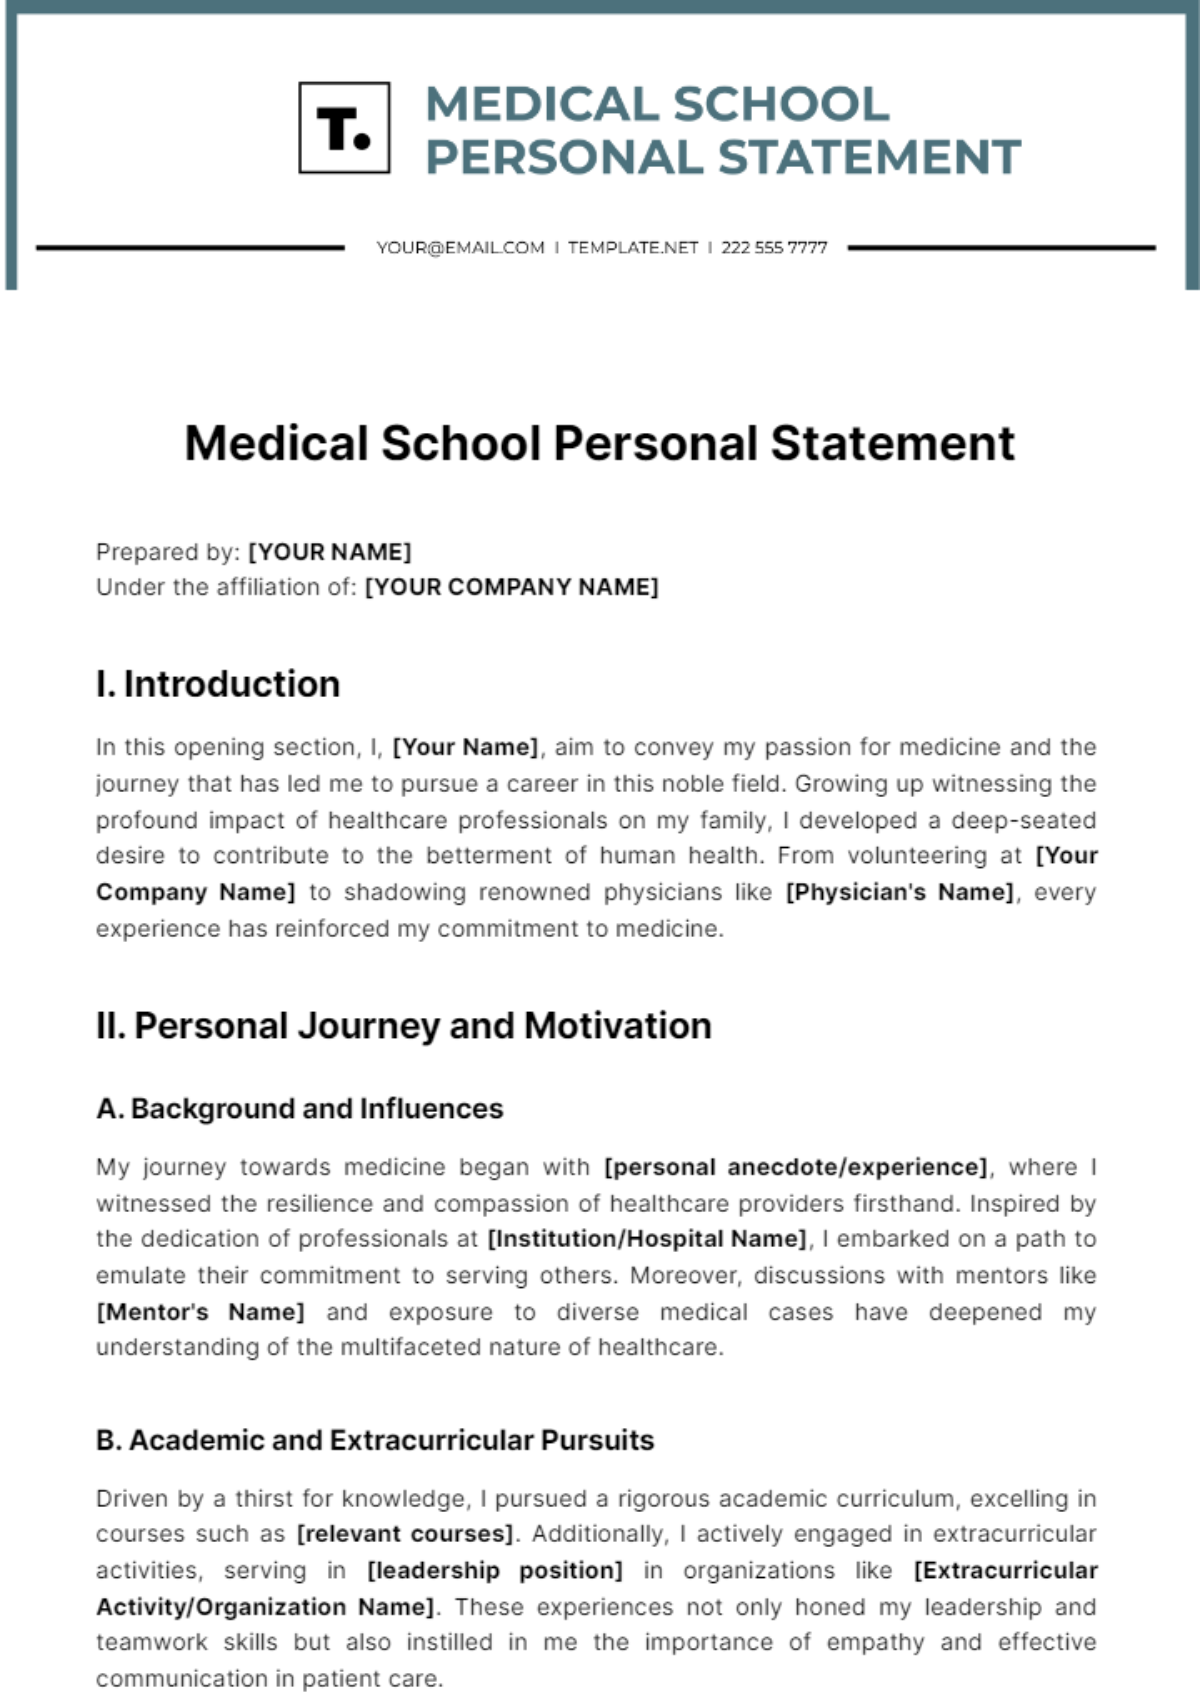 Medical School Personal Statement Template